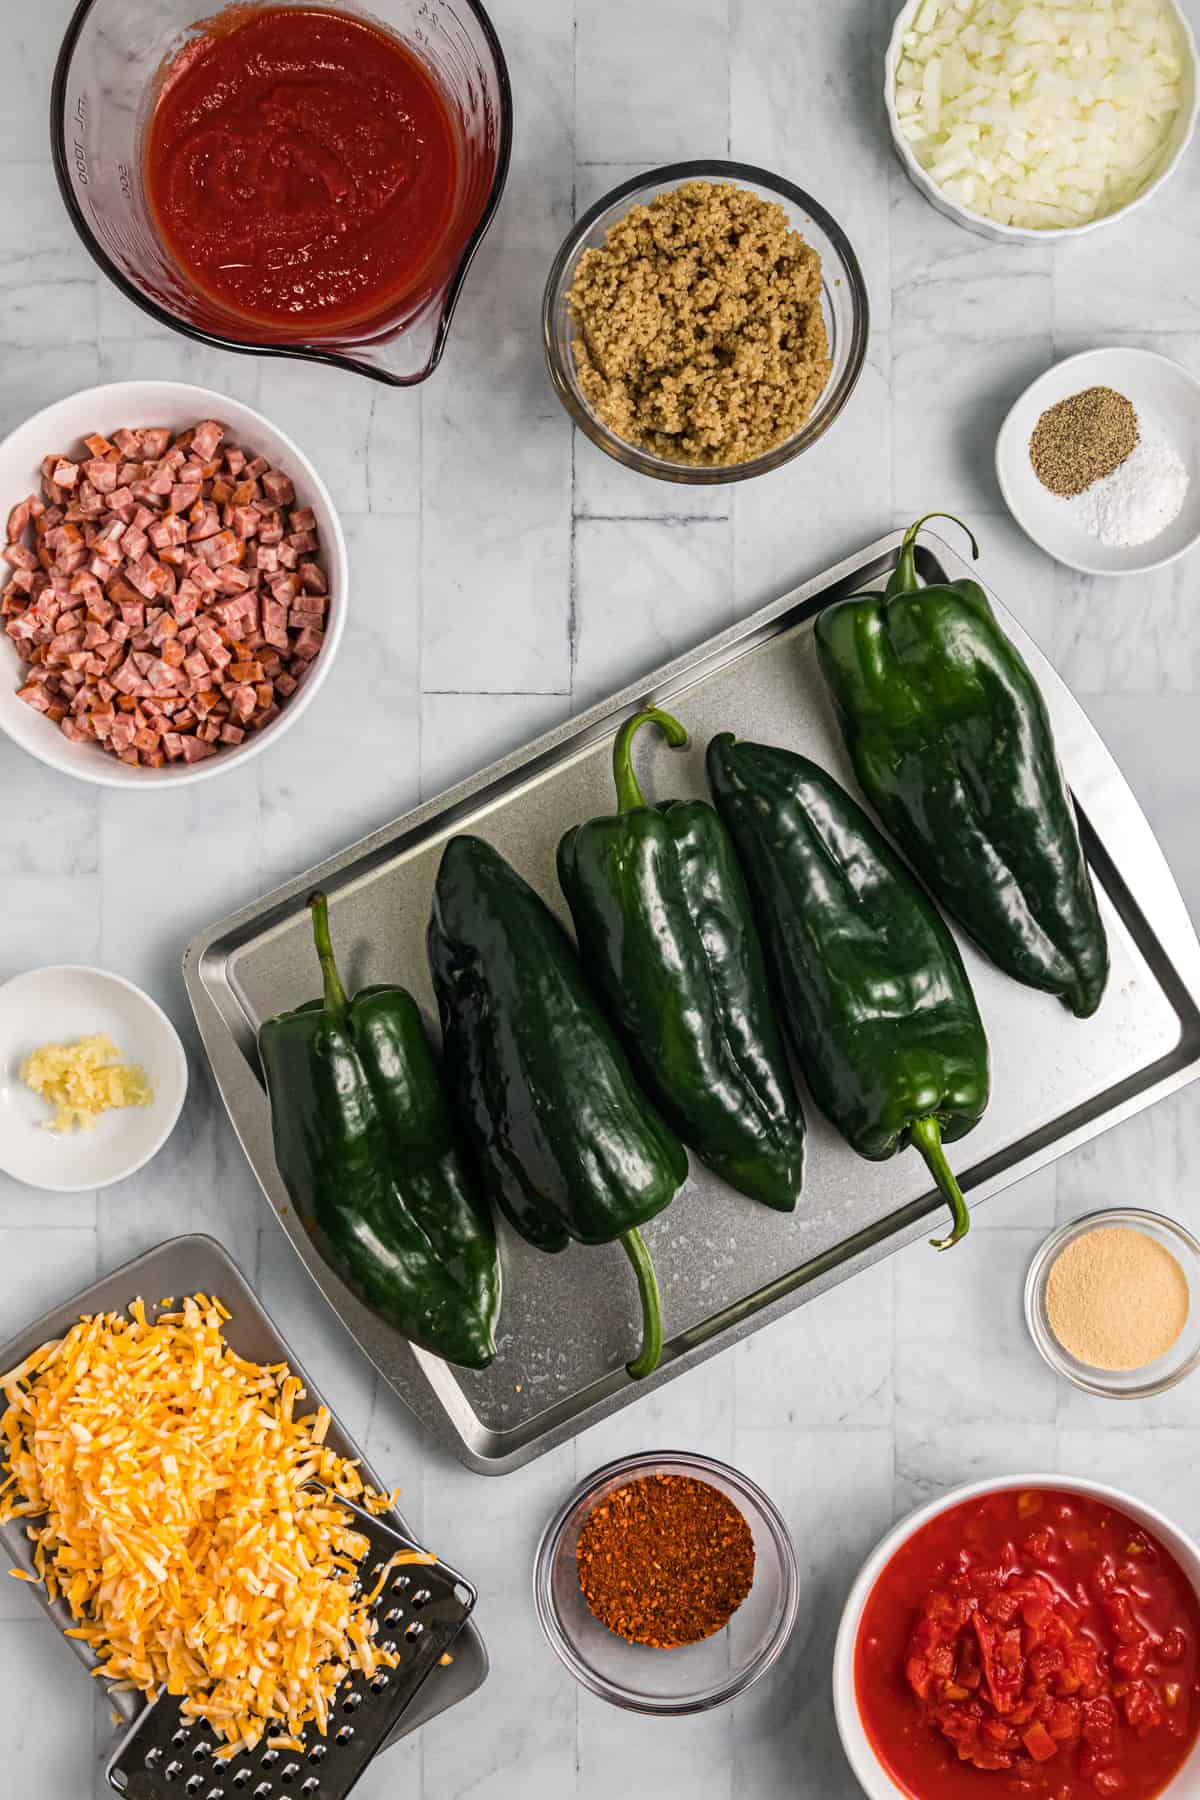 The ingredients for stuffed poblano peppers are presented on a white surface.